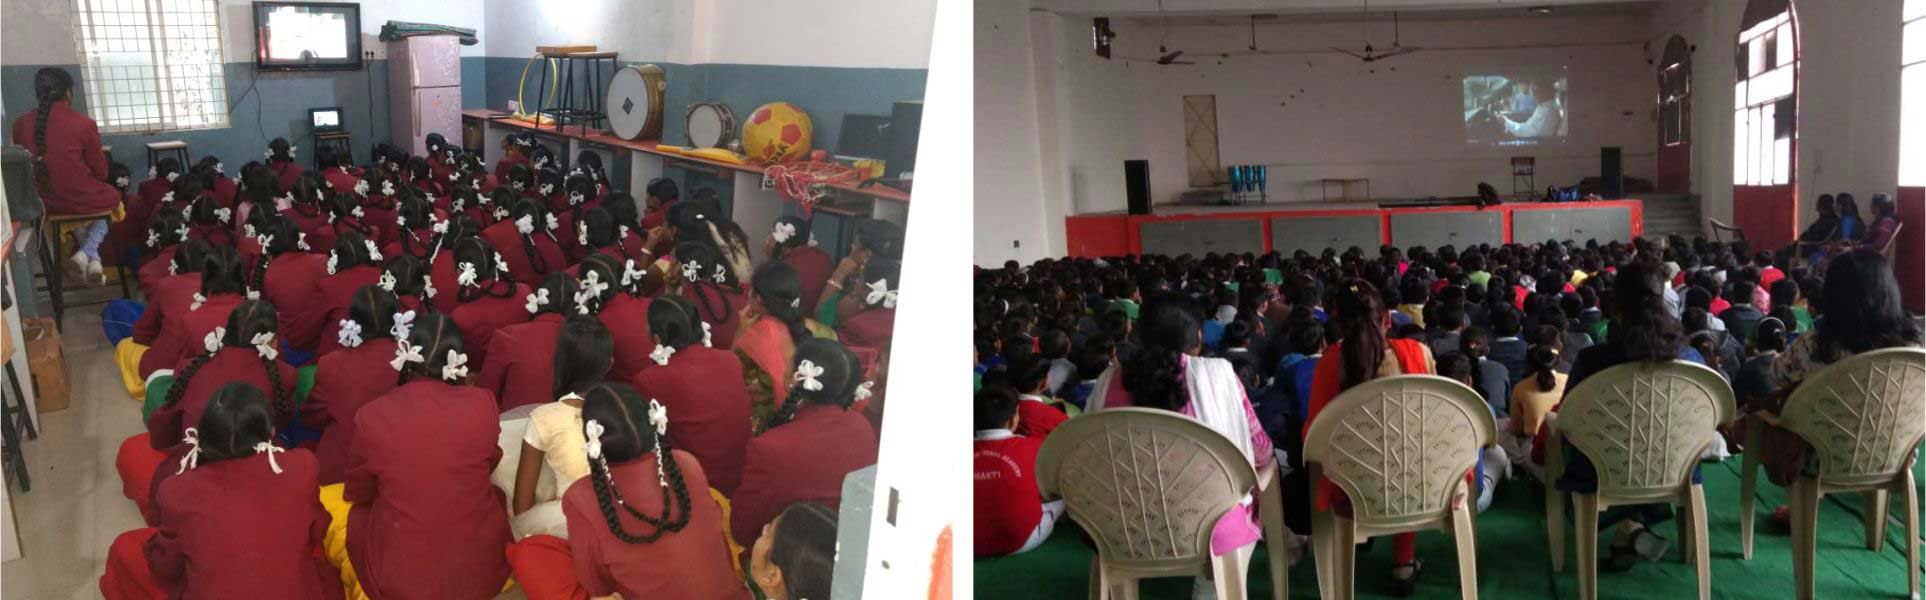 Value based cinema screened across schools under Child for Child programme